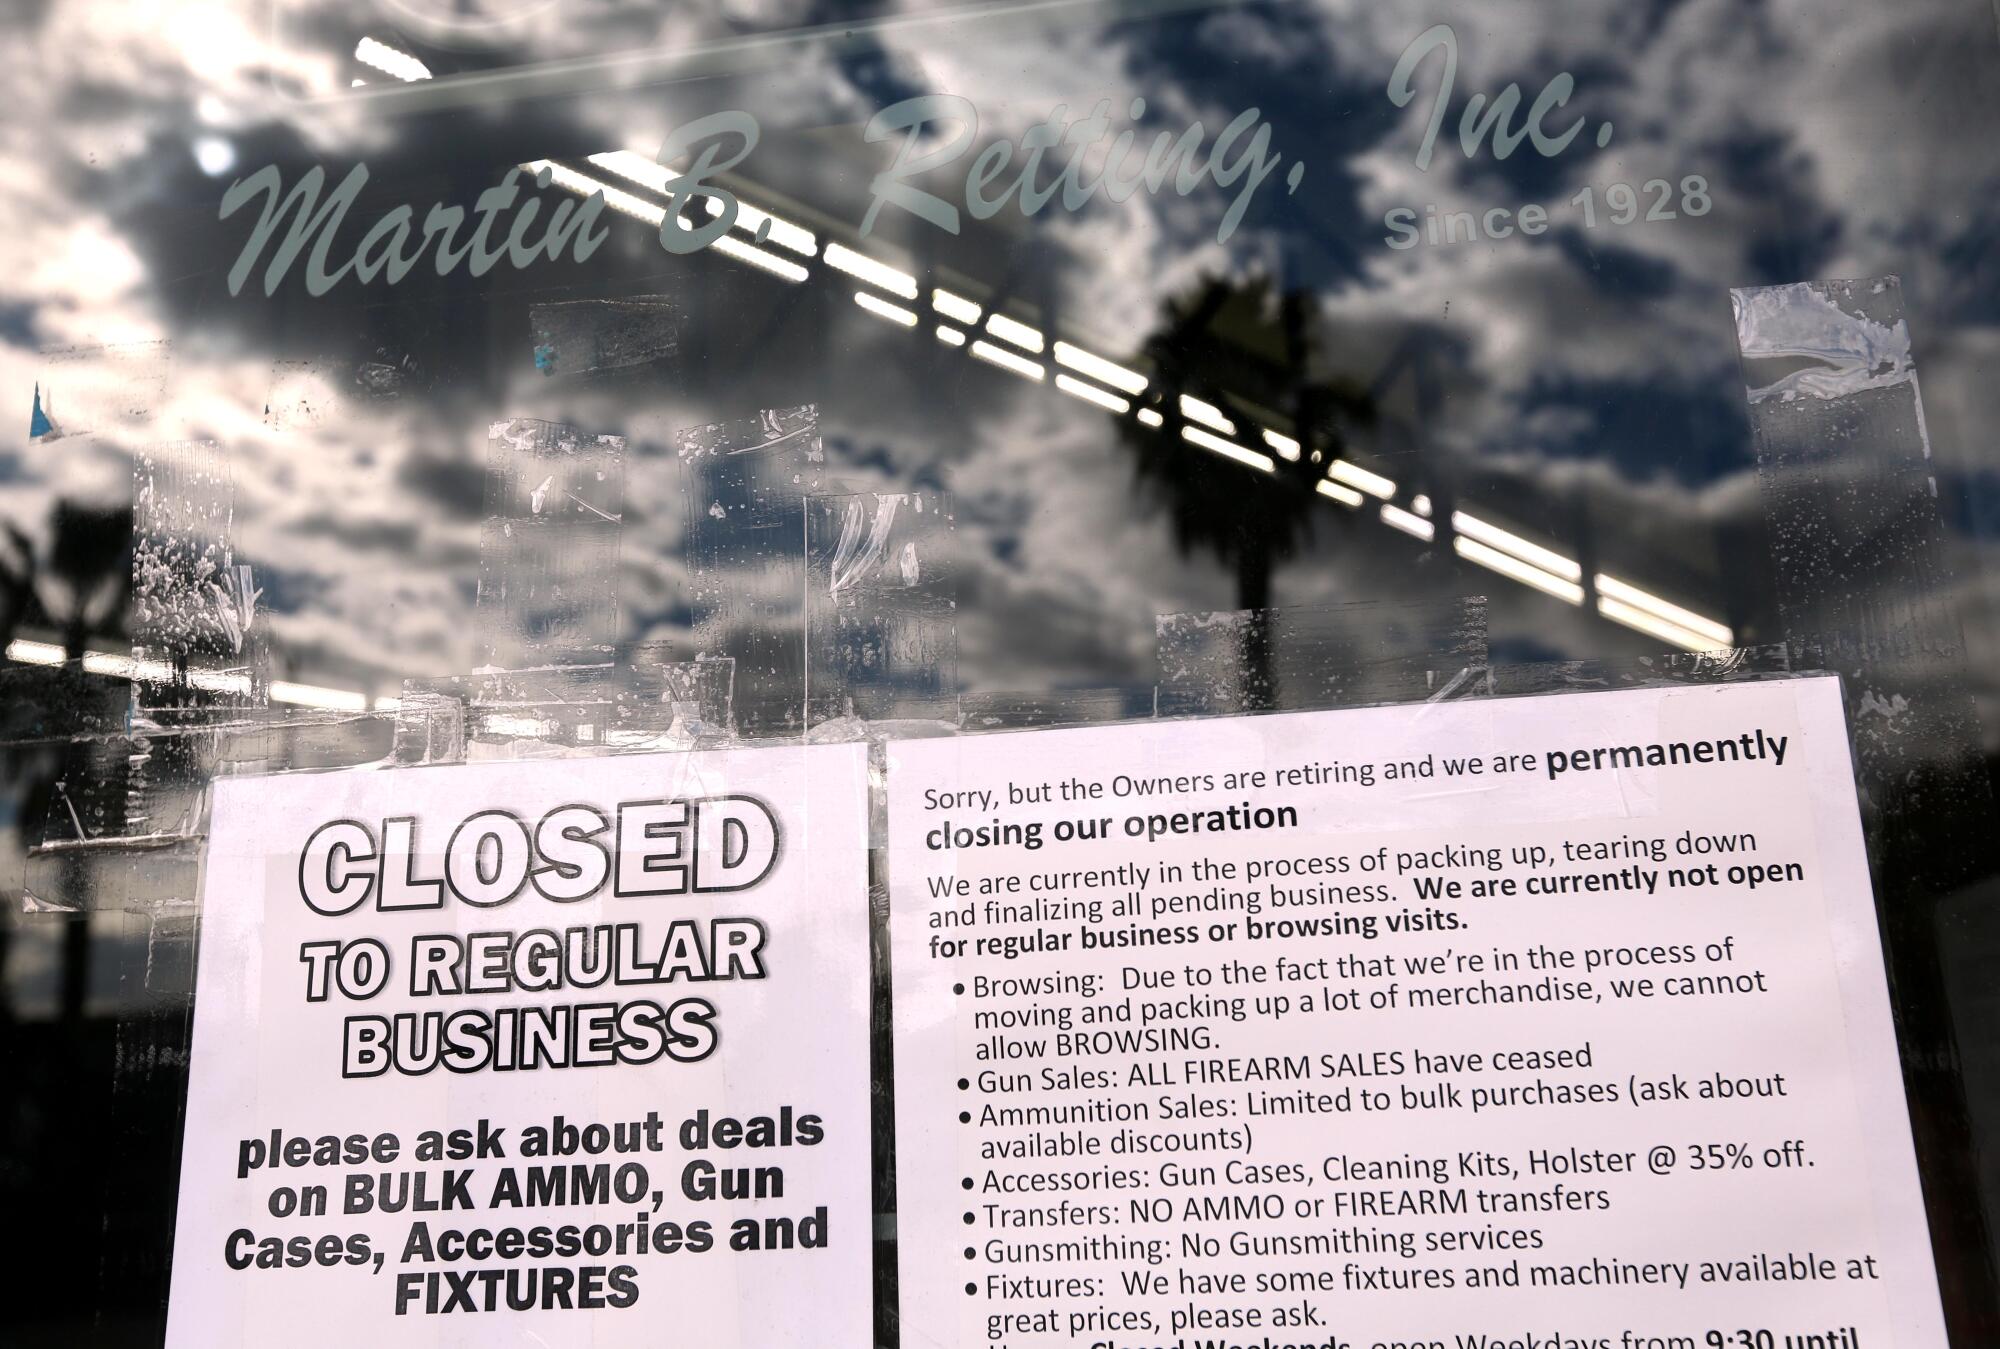 A notice on the front door of the Martin B. Retting Gun store.